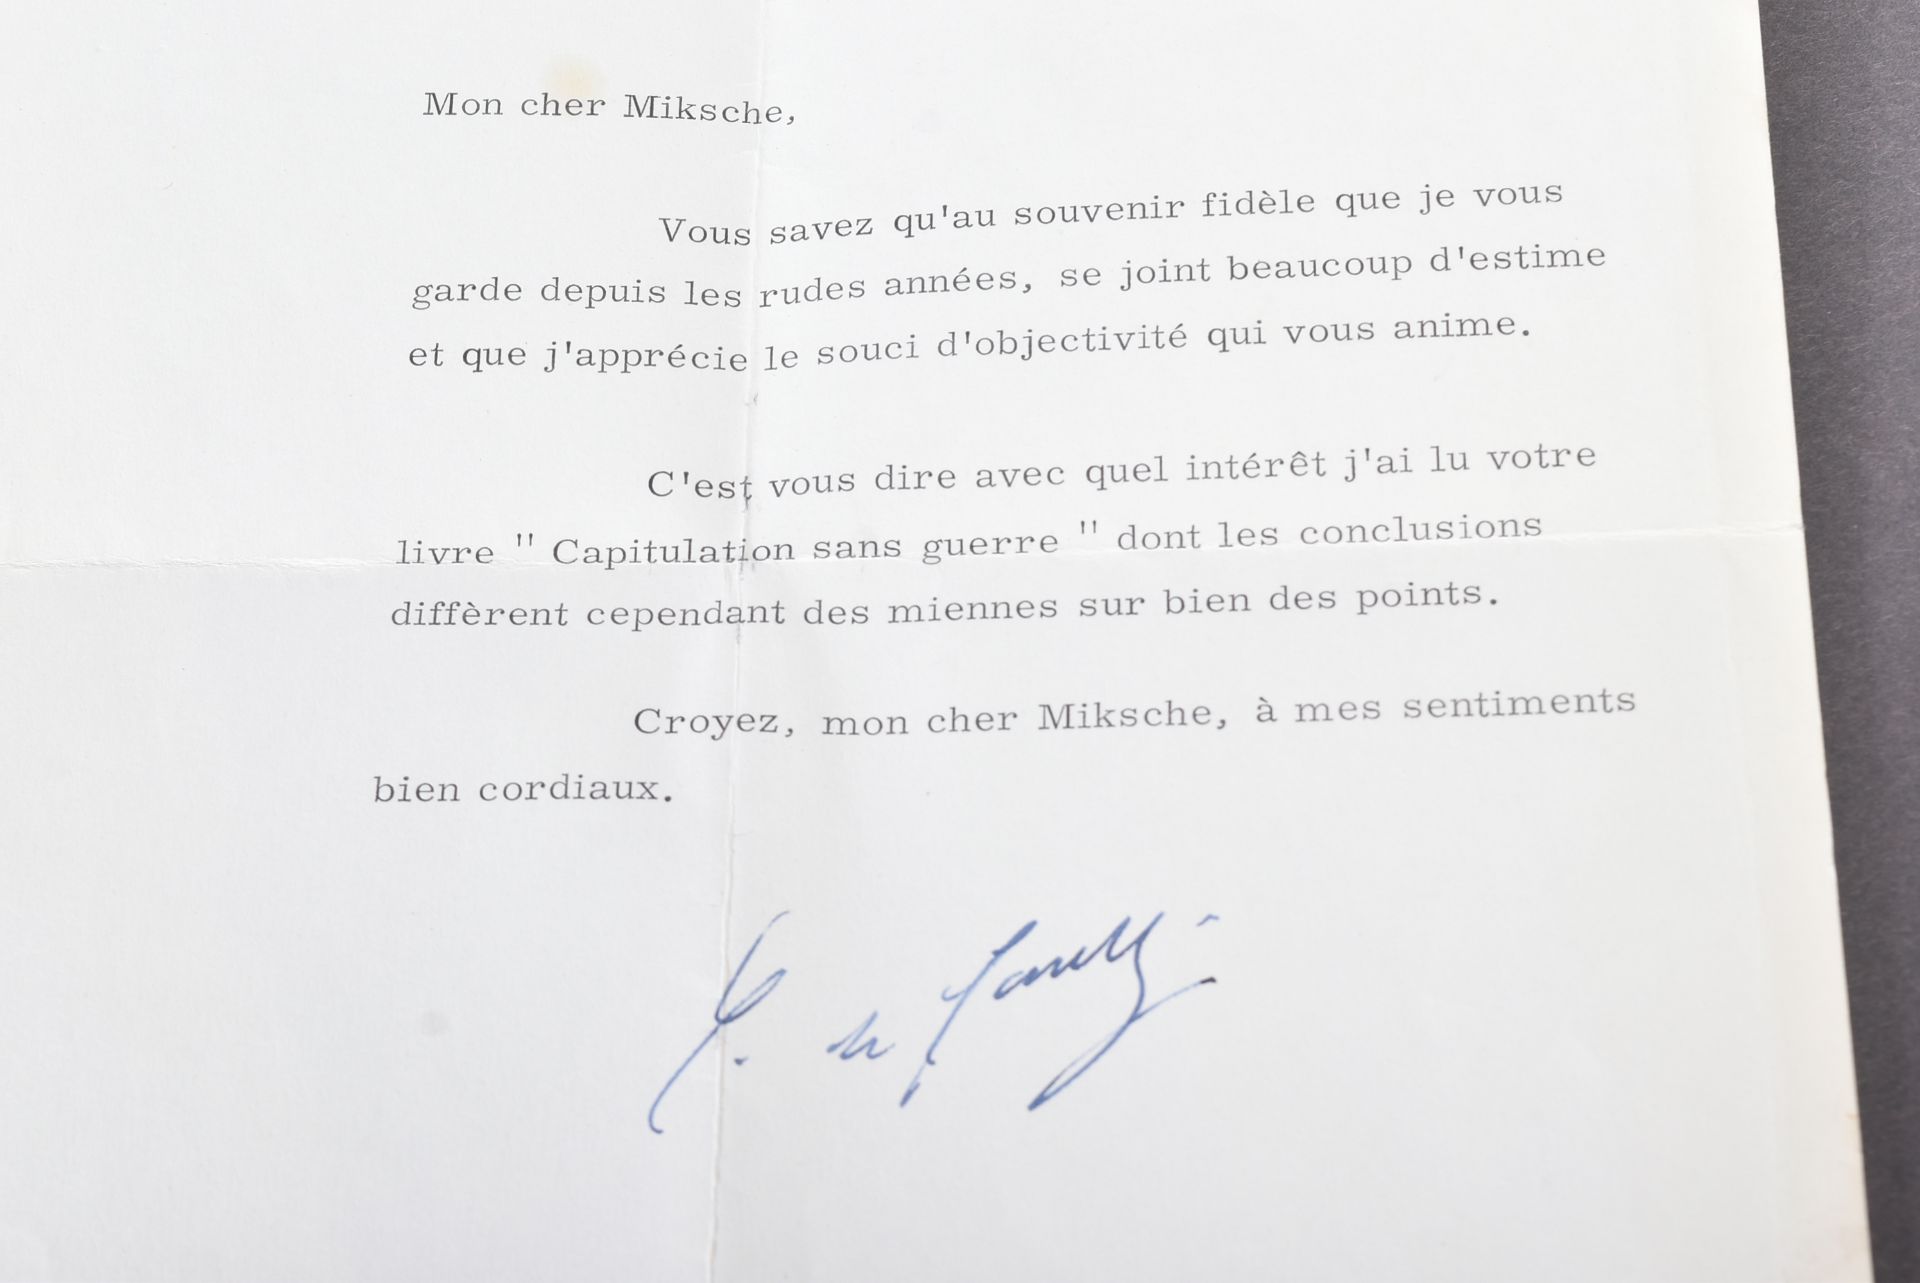 TWO SIGNED LETTERS FROM CHARLES DE GAULLE TO F. O. MIKSCHE - Image 5 of 7